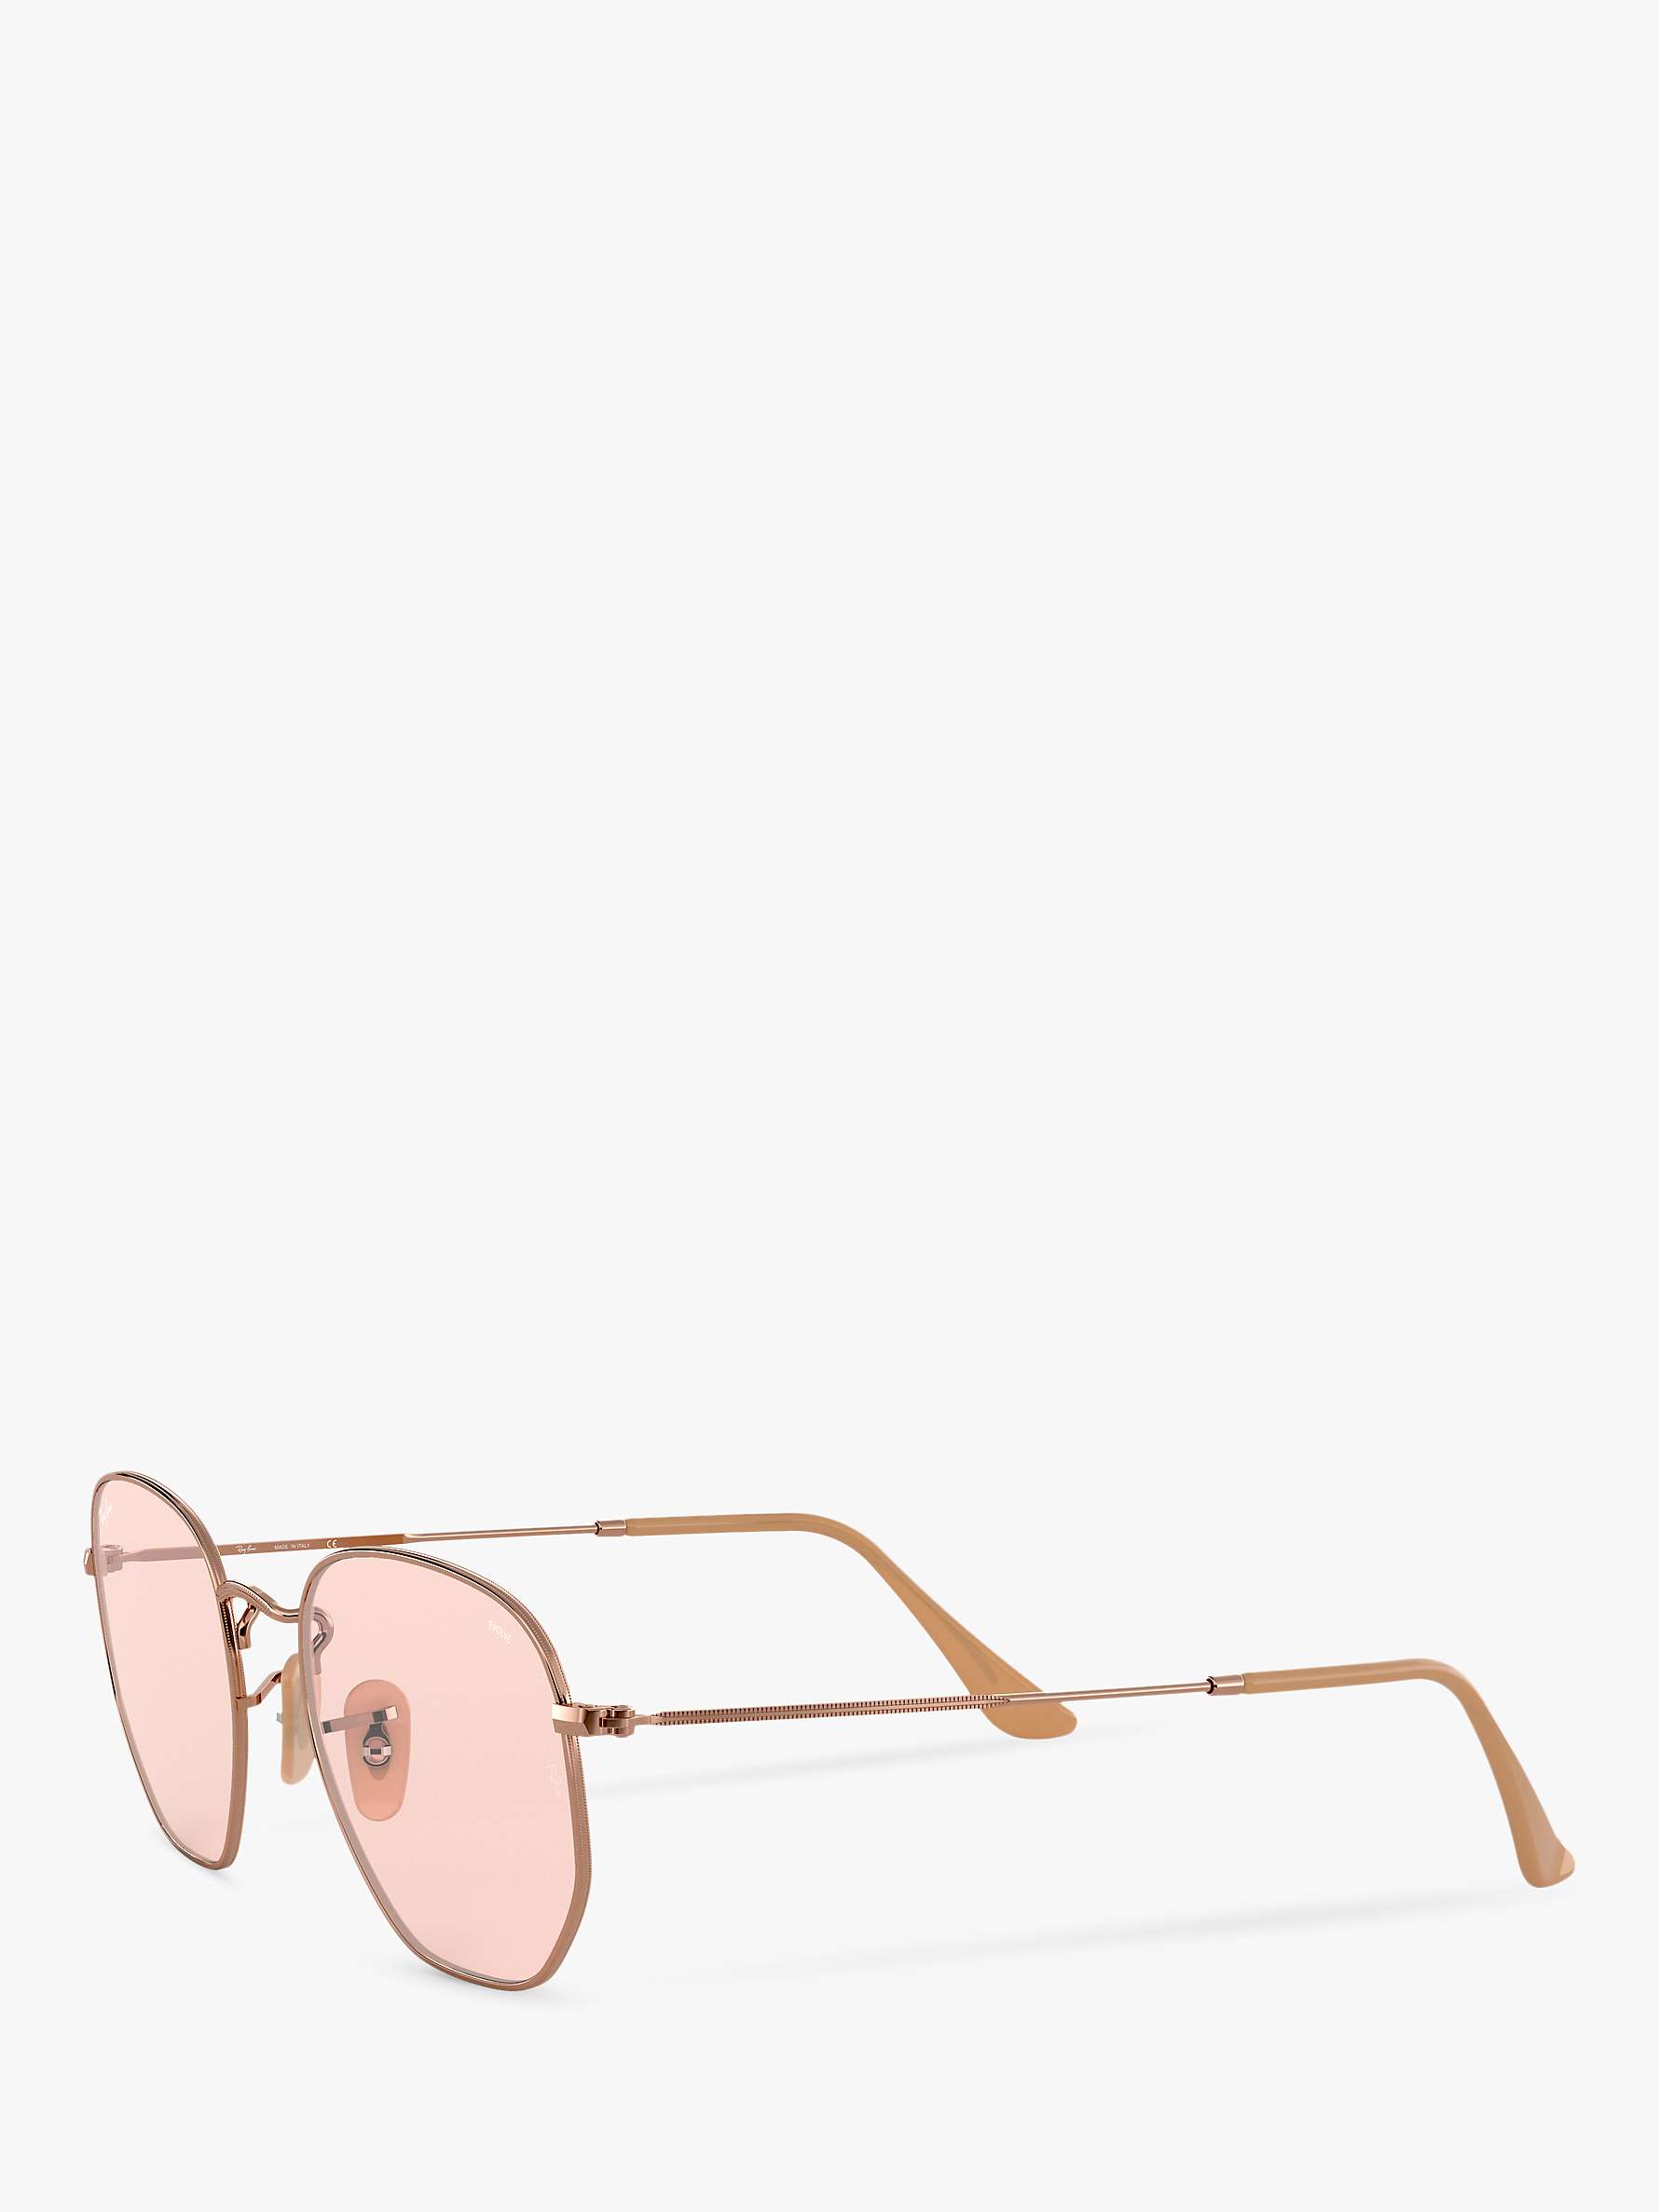 Buy Ray-Ban RB3548N Hexgonal Sunglasses, Copper/Pink Online at johnlewis.com